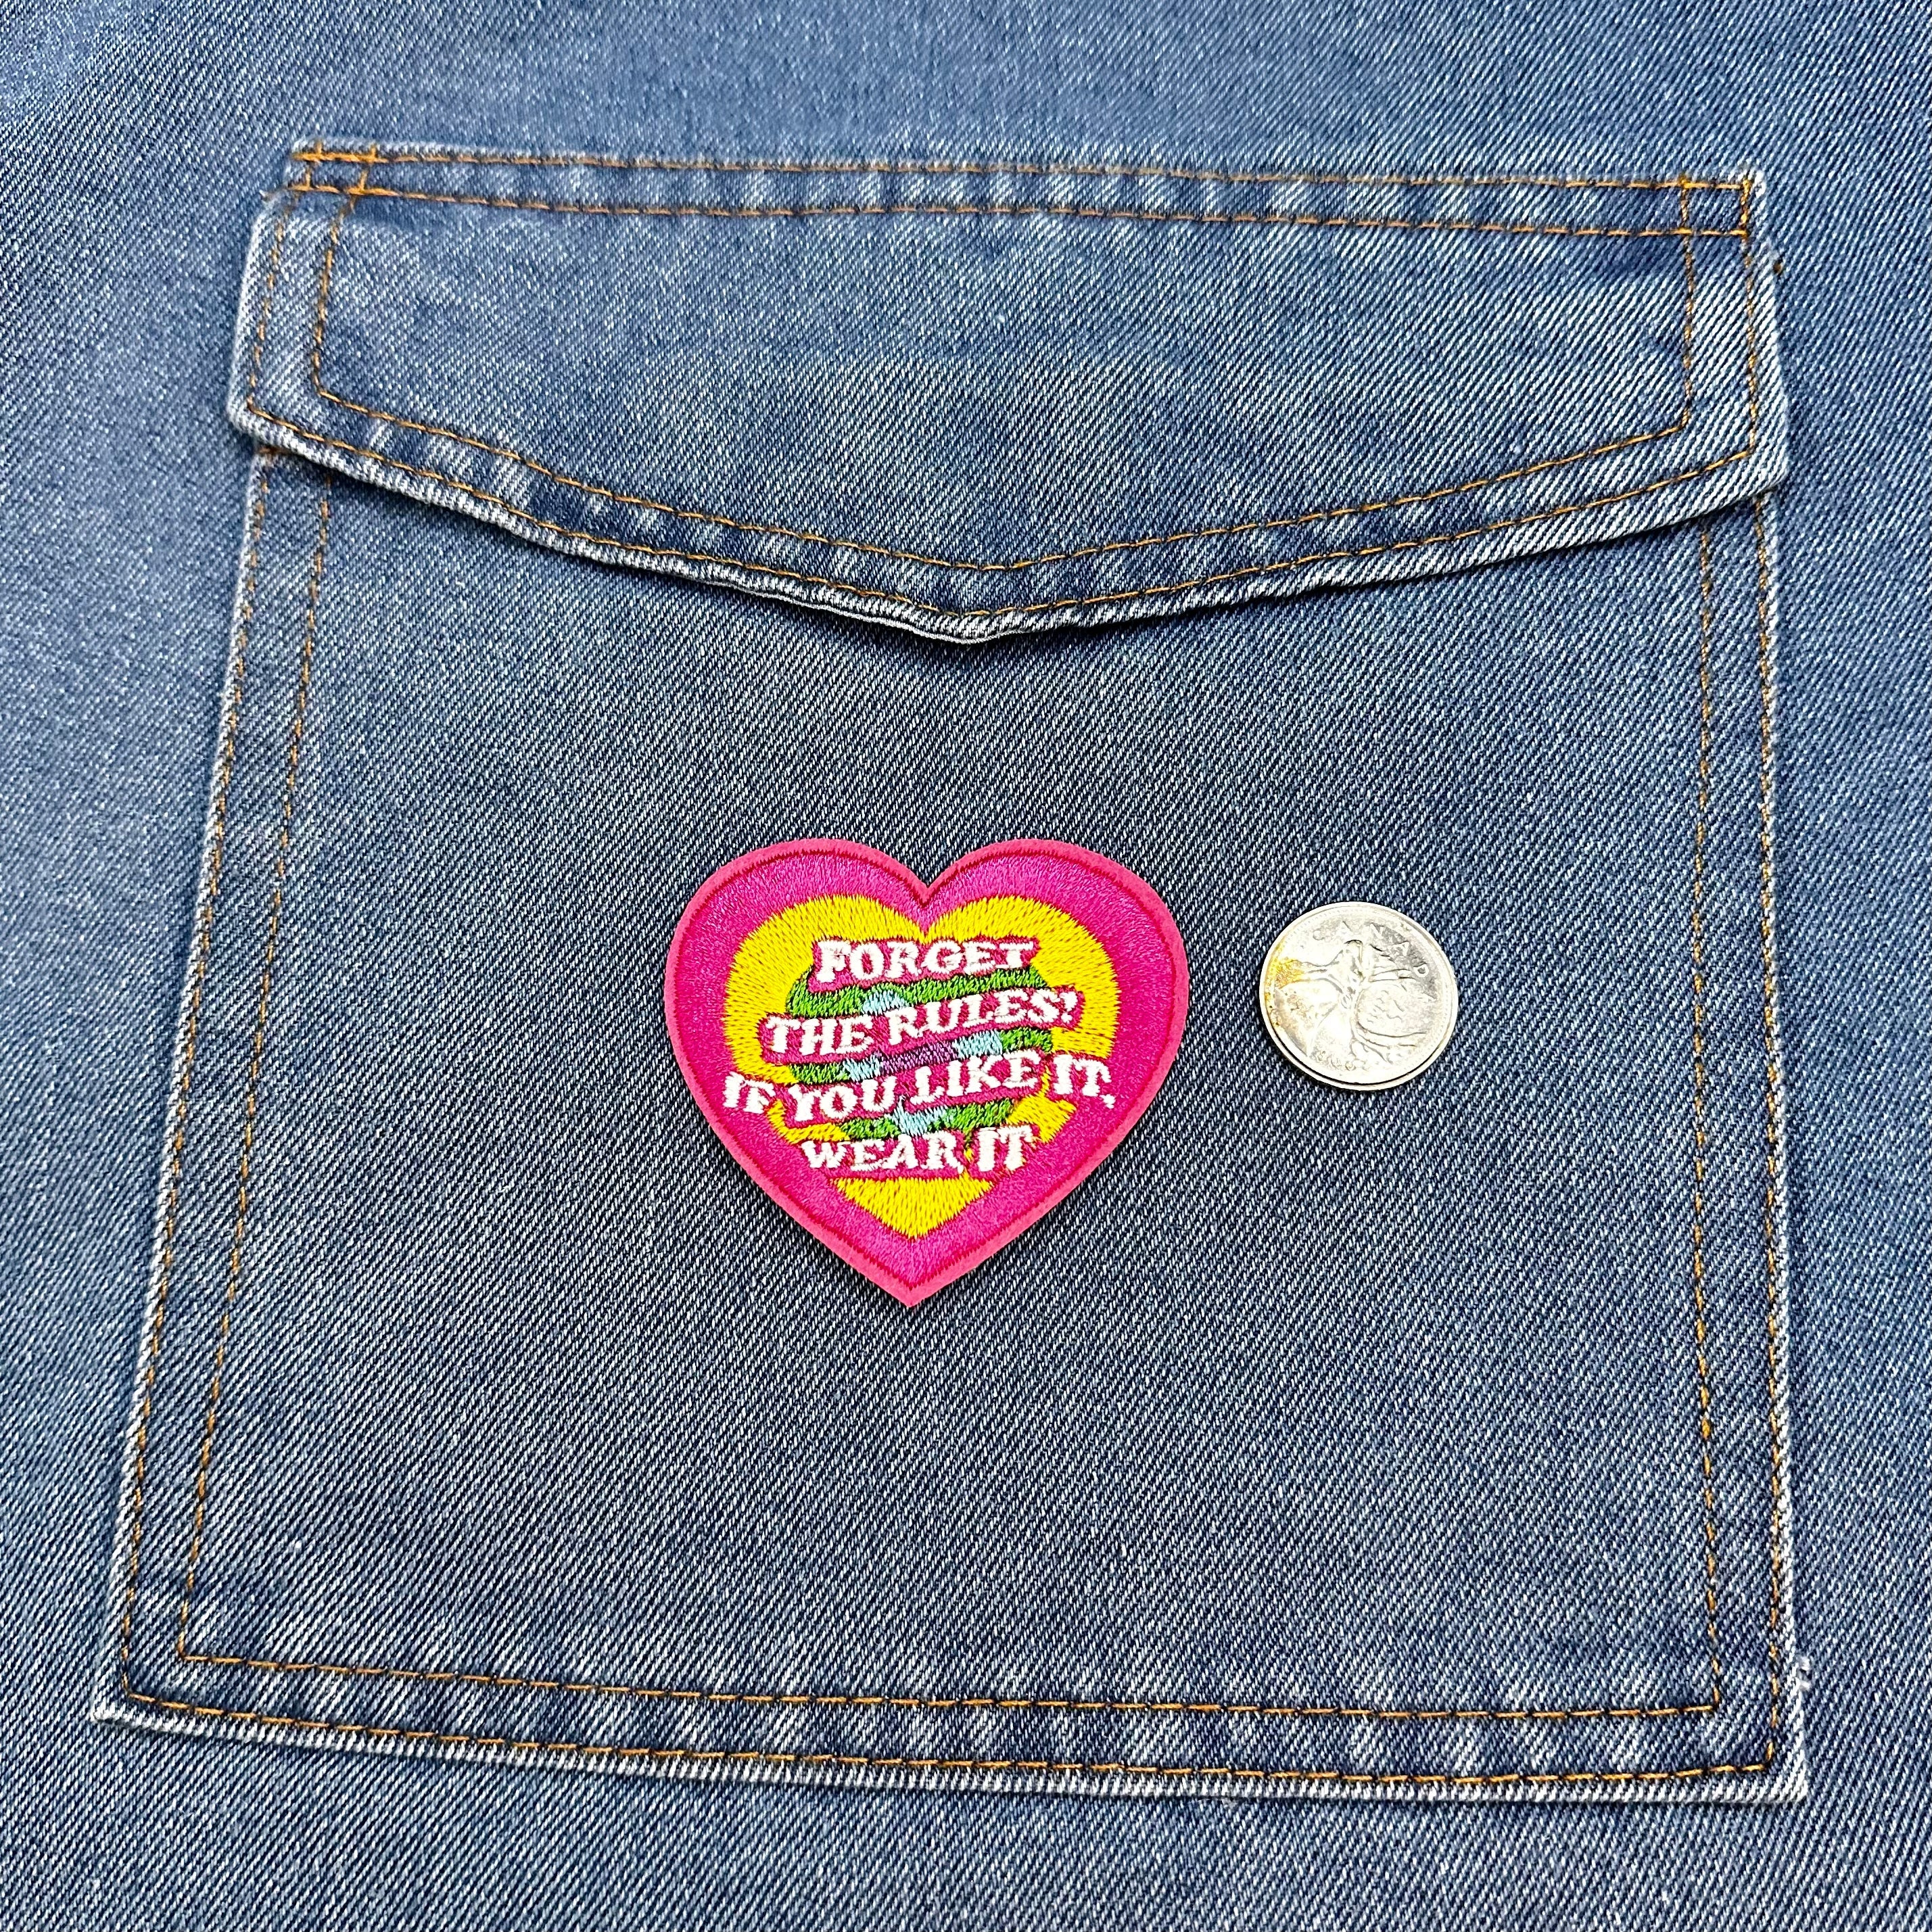 Iron On Patches - Forget the rules…if you like it…wear it